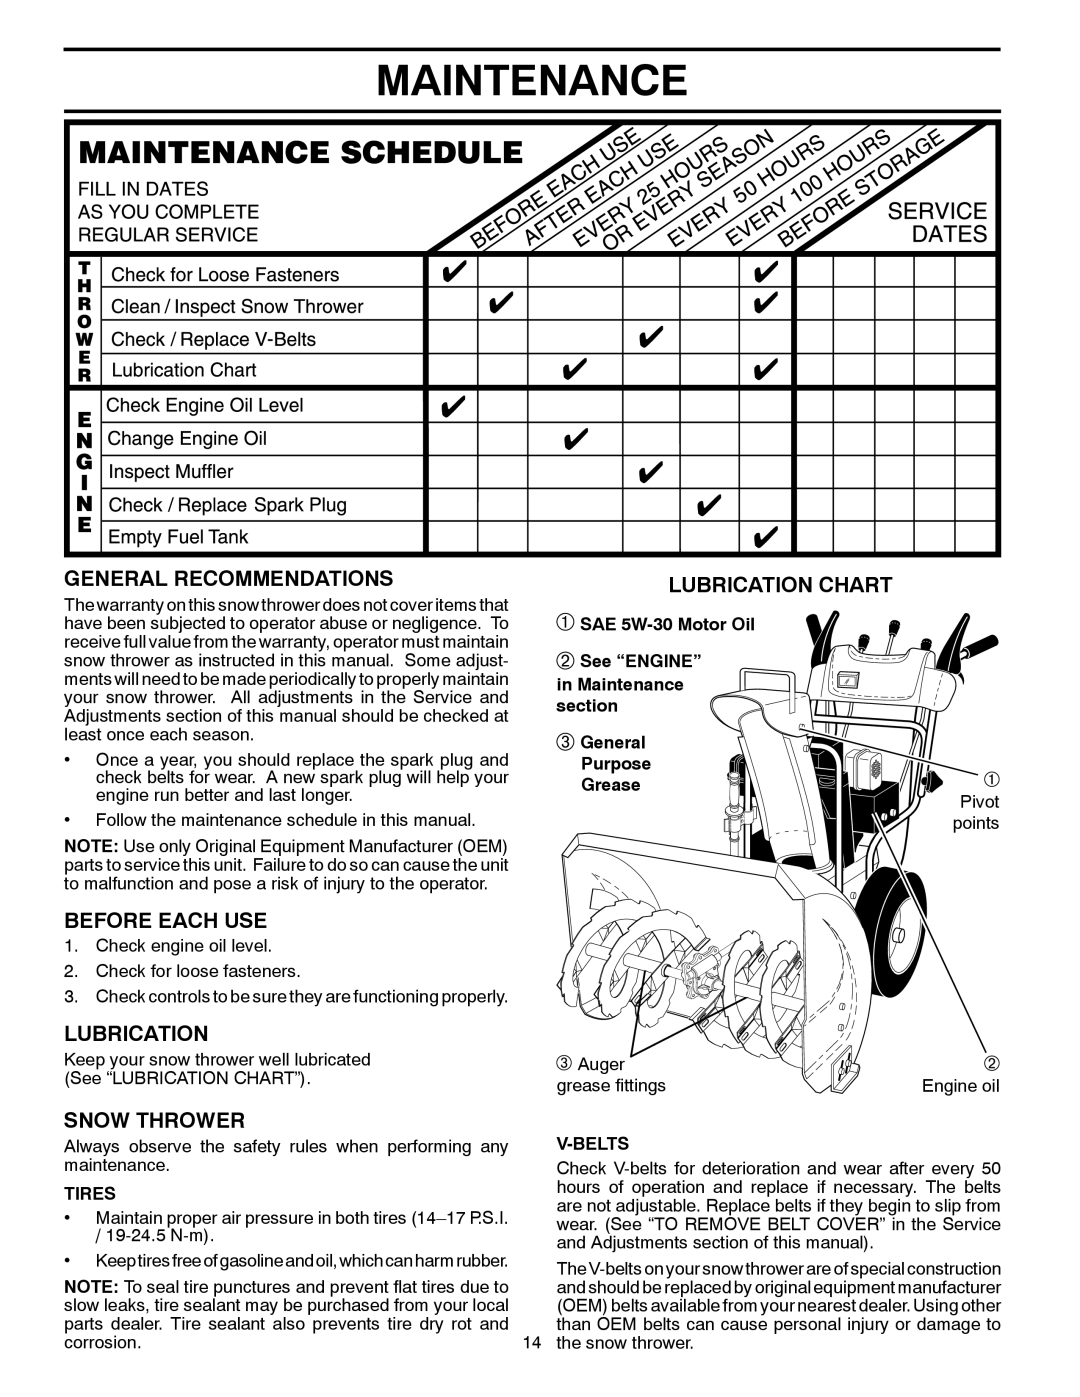 Poulan 418984, 96194000602 Maintenance, General Recommendations, Before Each Use, Lubrication Chart, Snow Thrower 